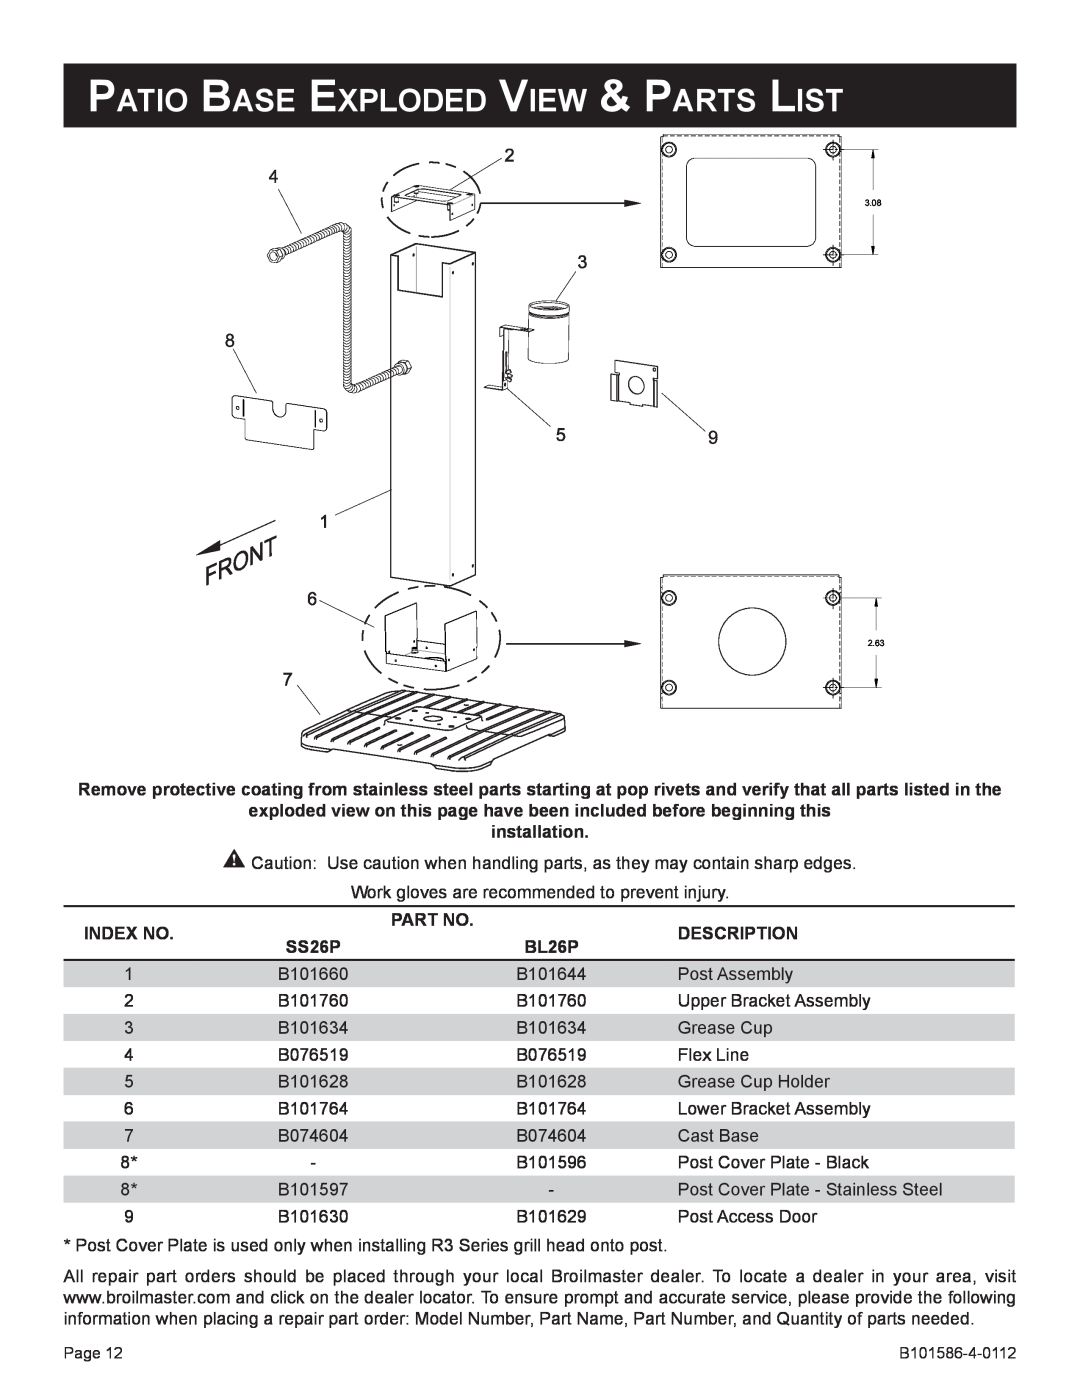 Broilmaster BL26P-1, DCB1-2, SS26P-1, SS48G-1 Patio Base Exploded View & Parts List, installation, Index No, Description 